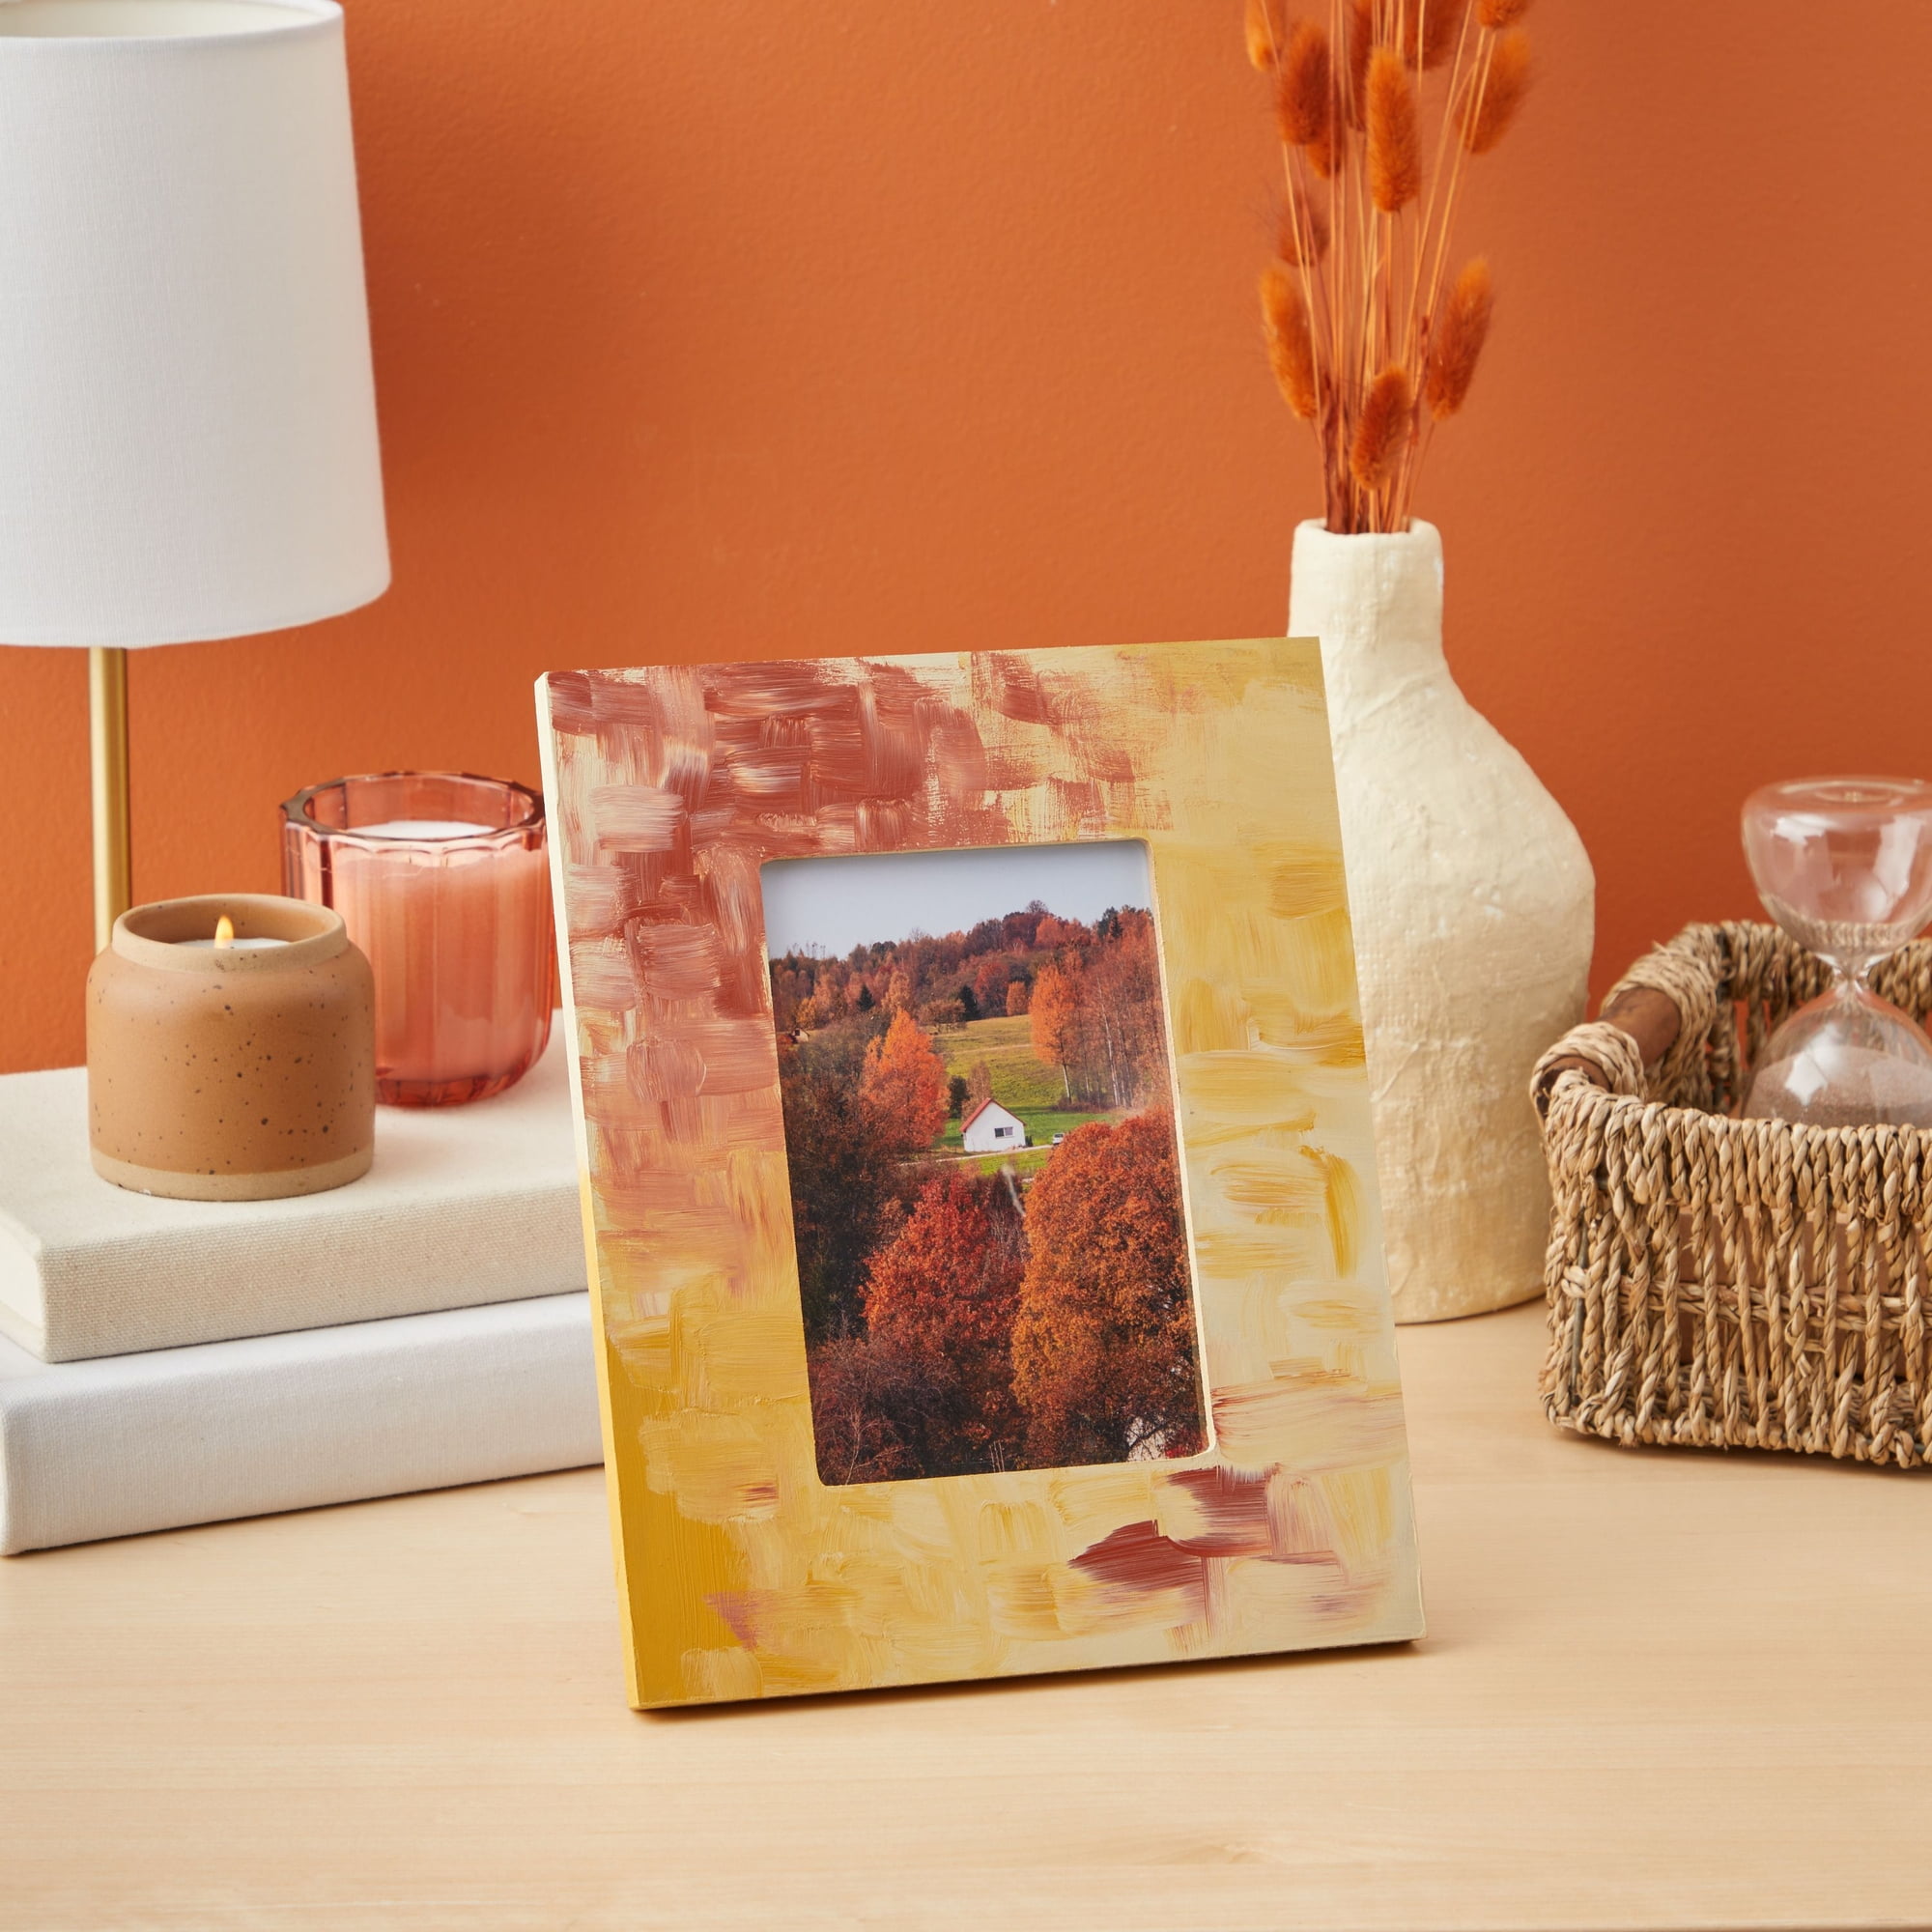 4x6 Picture Frame Natural Maple 4x6 Photo 4 x 6 4x6 Poster — Modern Memory  Design Picture frames